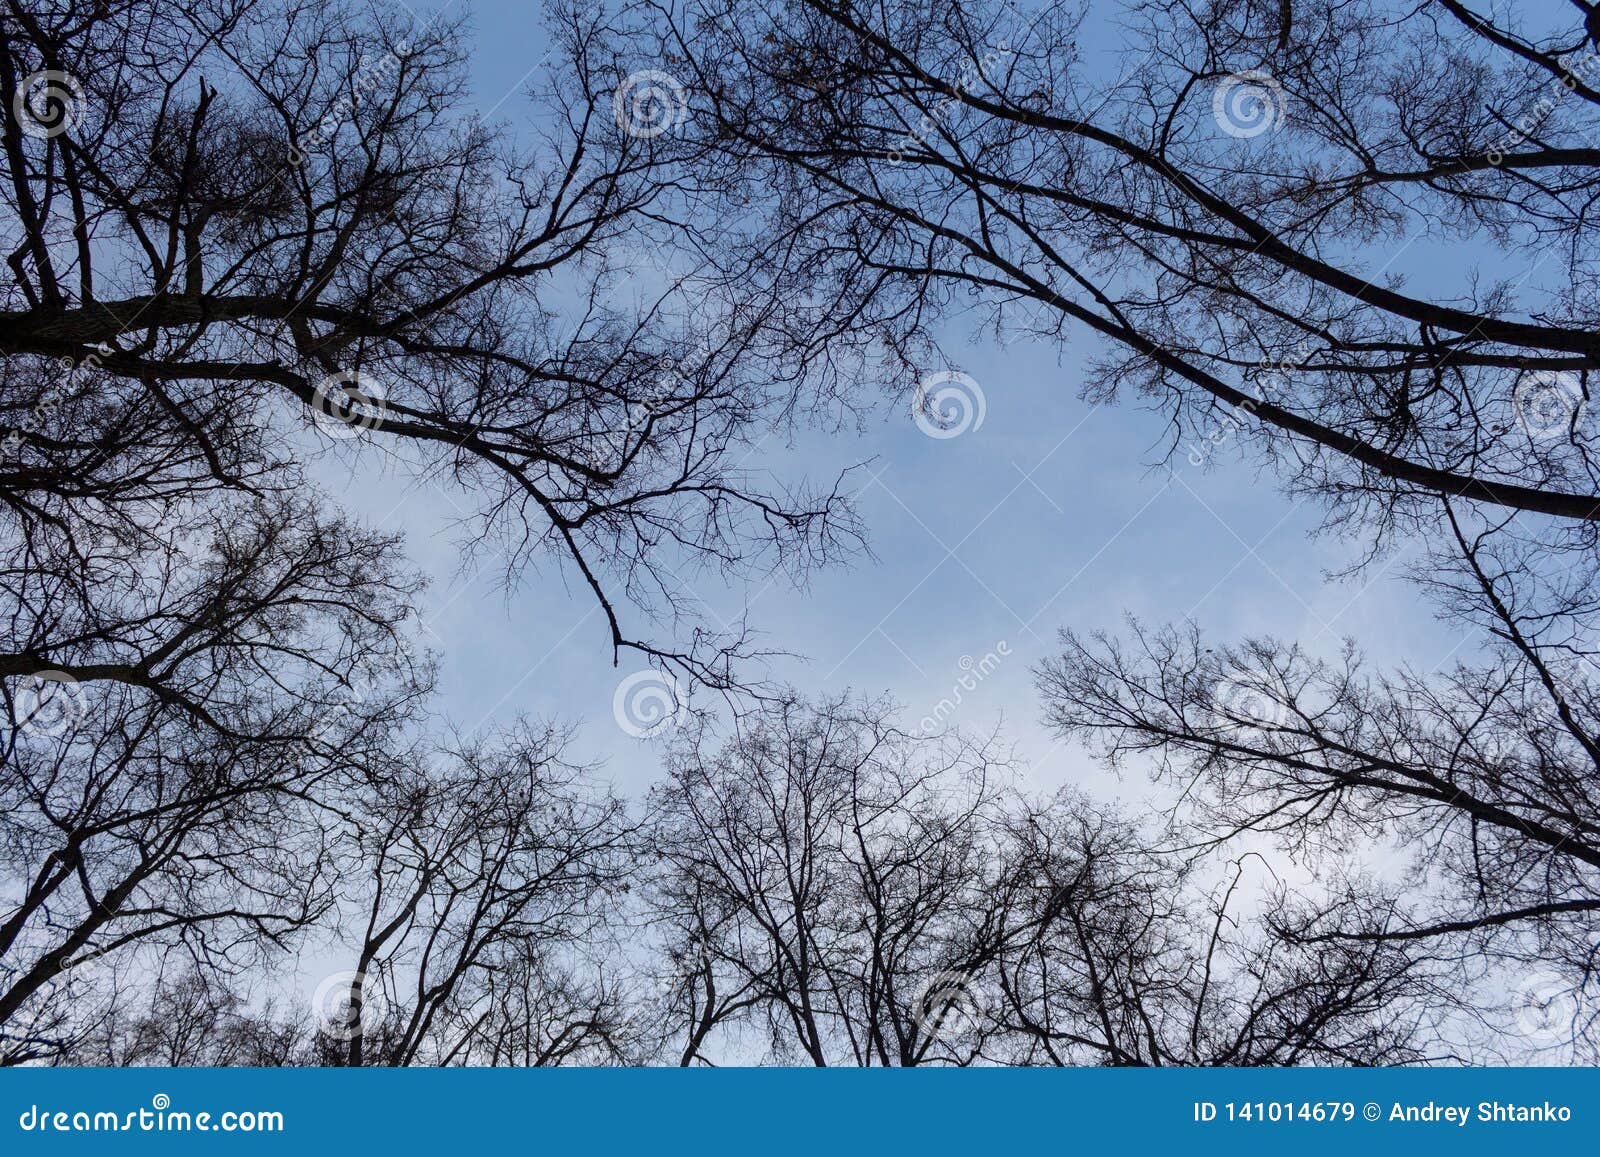 Bare branch trees stock image. Image of beautiful, light - 141014679